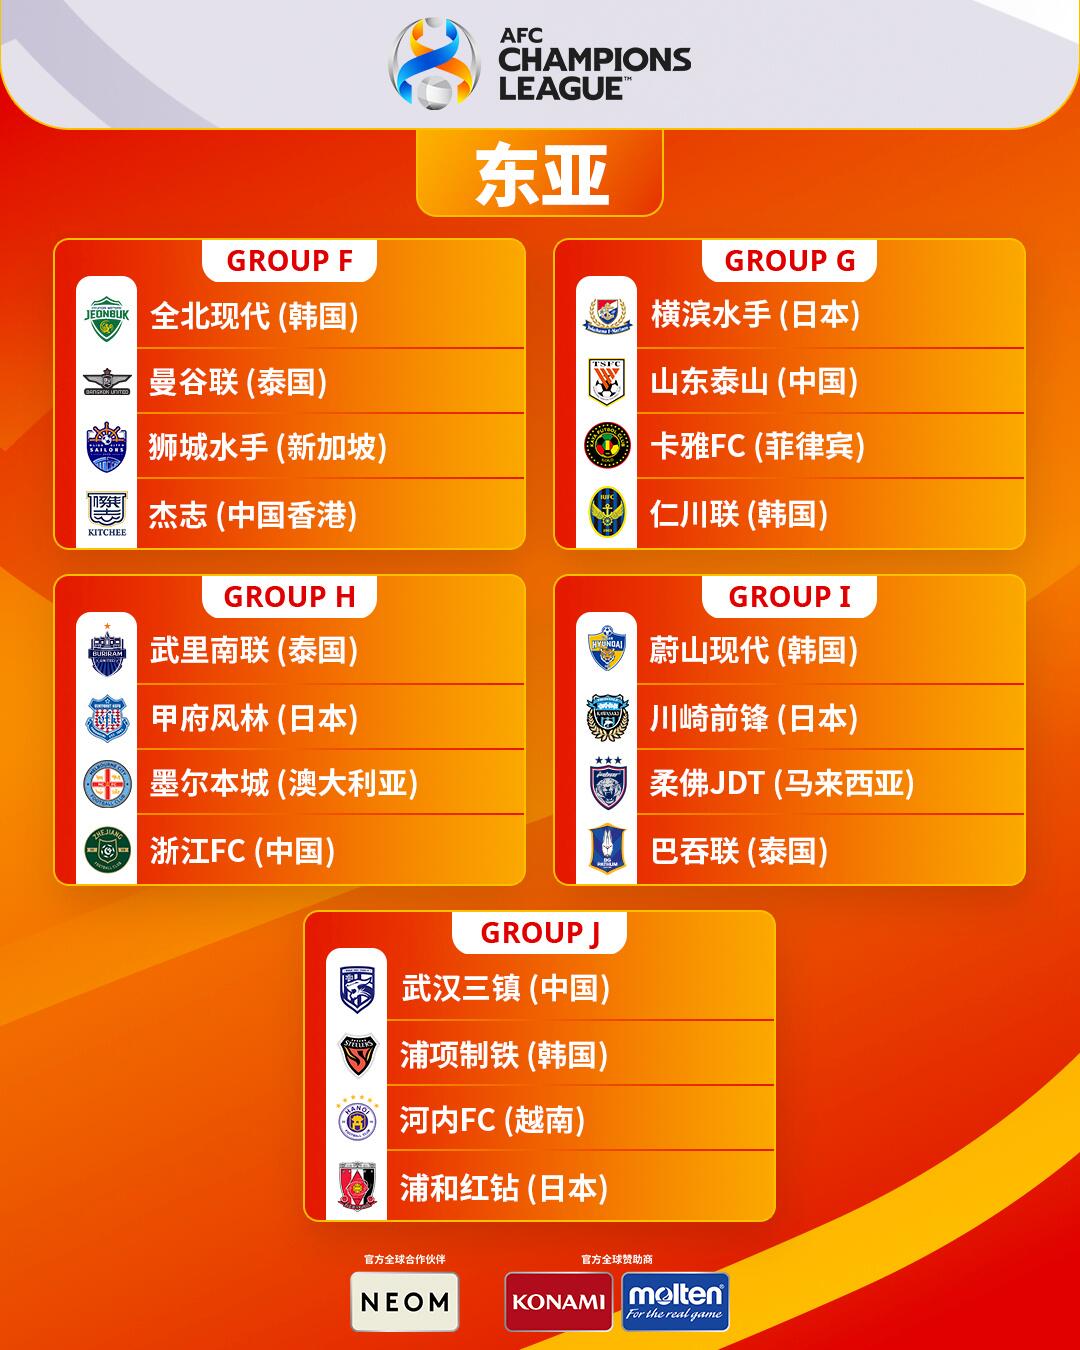 Are you confident⁉◆ Taishan, Sanzhen, Zhejiang, can the Chinese Super League team enter the elimination match after 3 years